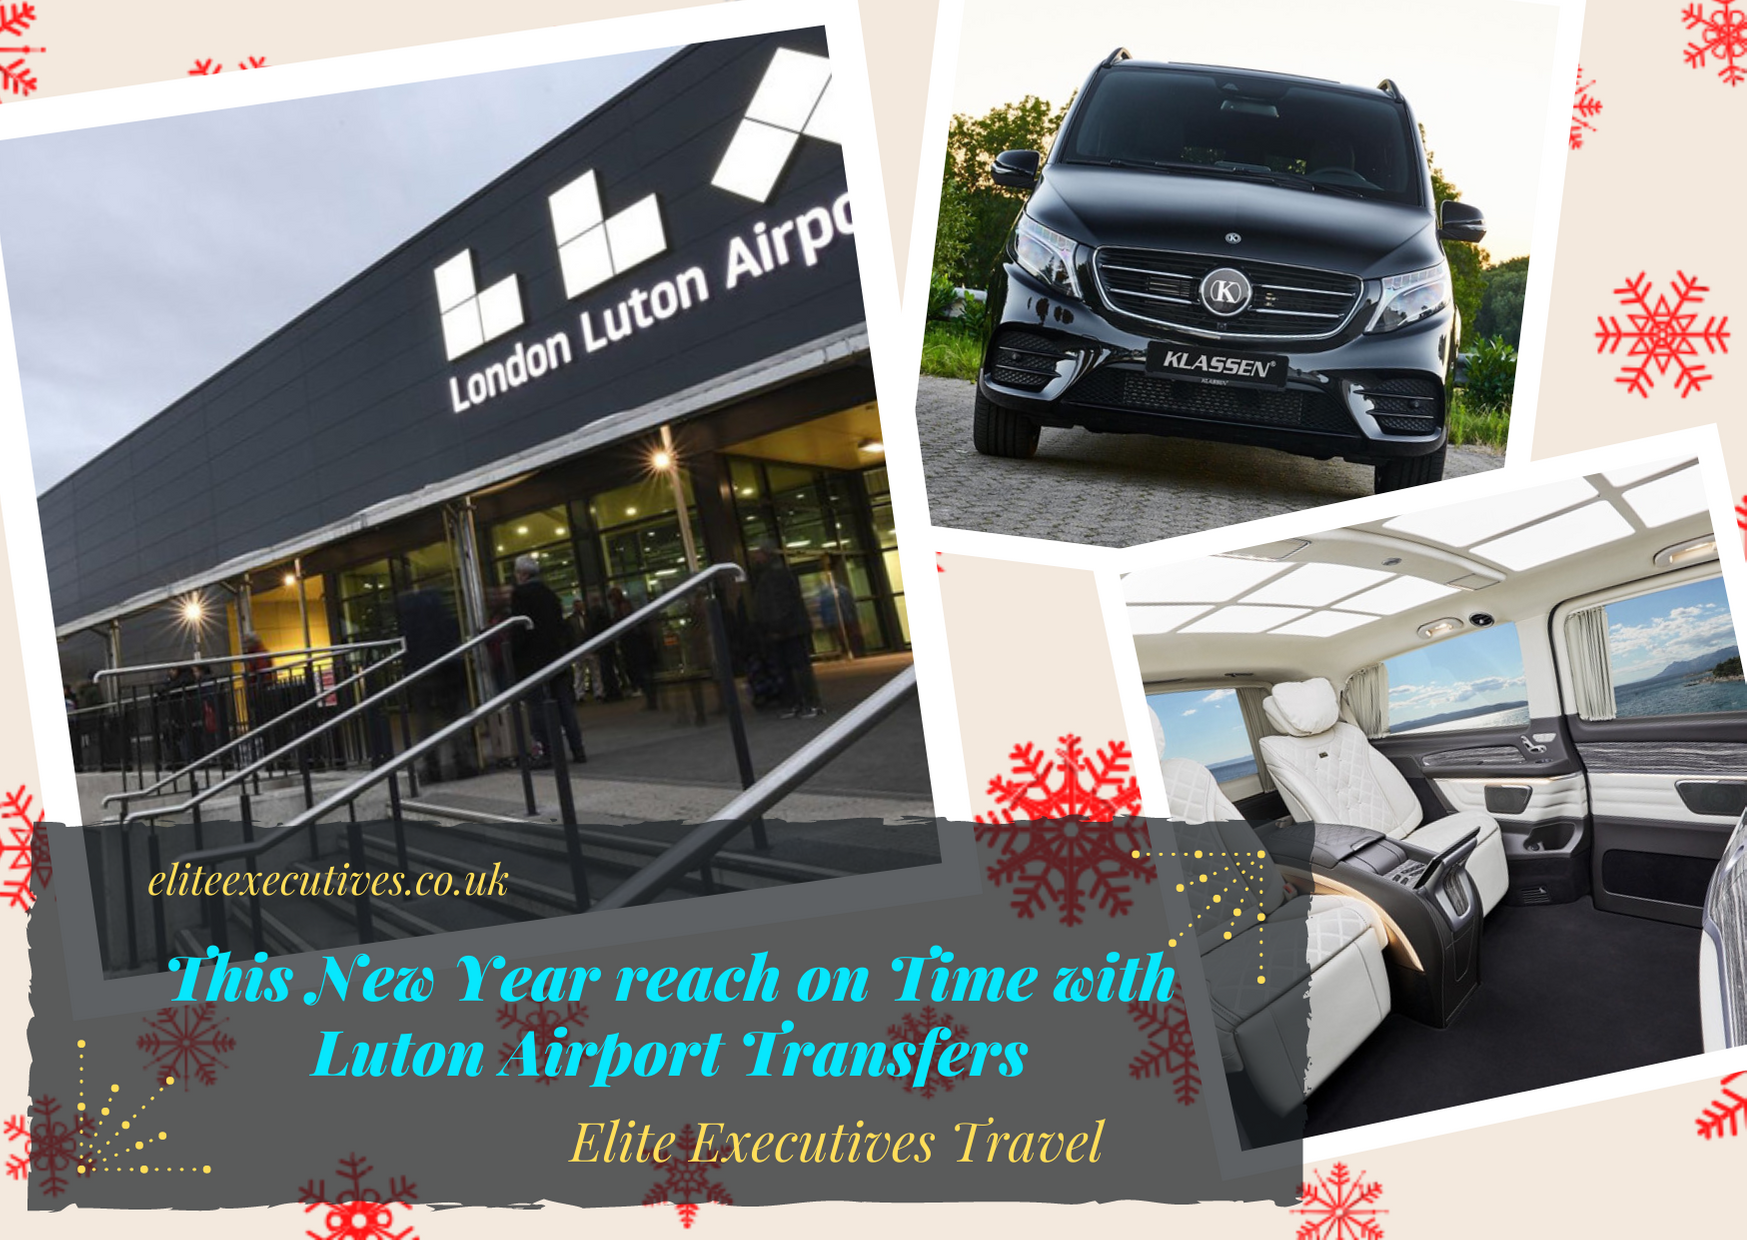 This New Year reach on Time with Luton Airport Transfers